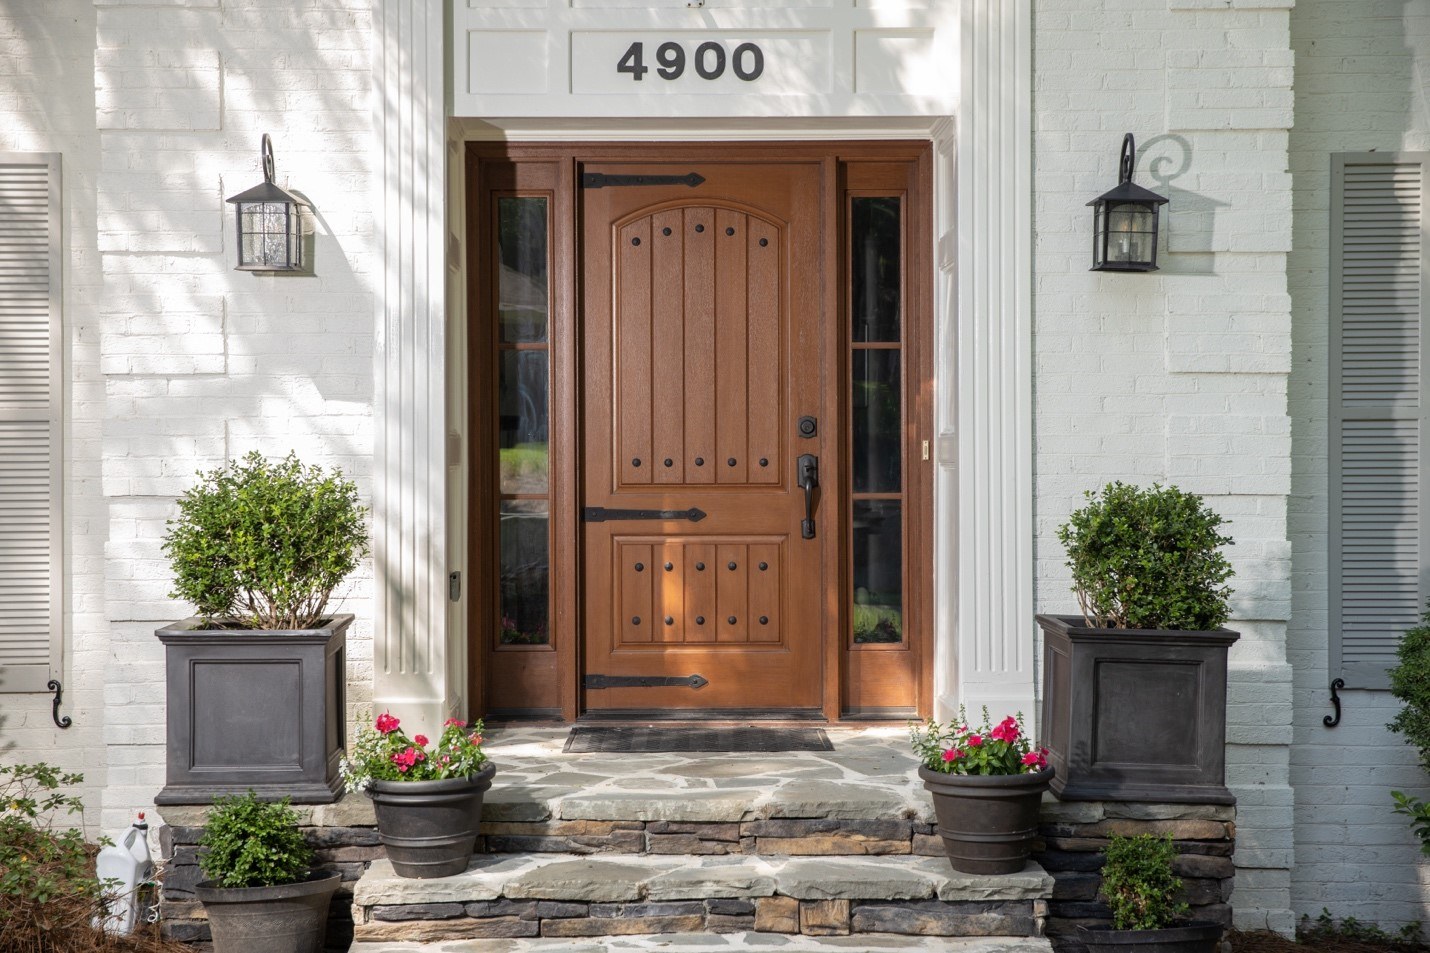 A large woodgrain energy-efficient entry door with contrasting hardware